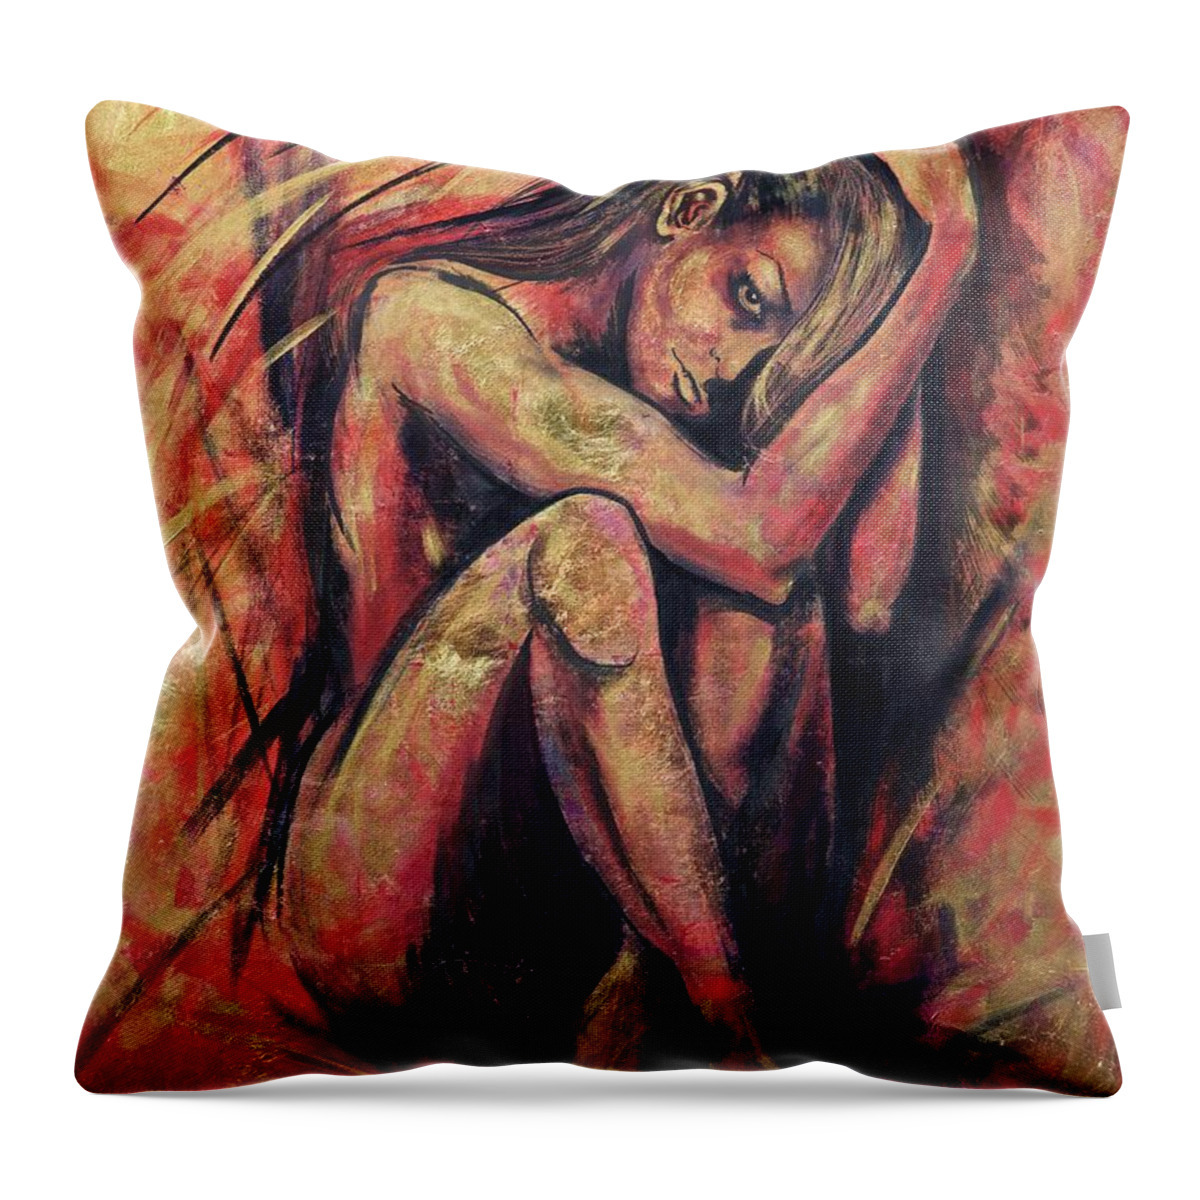 Precious Metals Iv Throw Pillow featuring the painting Precious Metals IV by Debi Starr